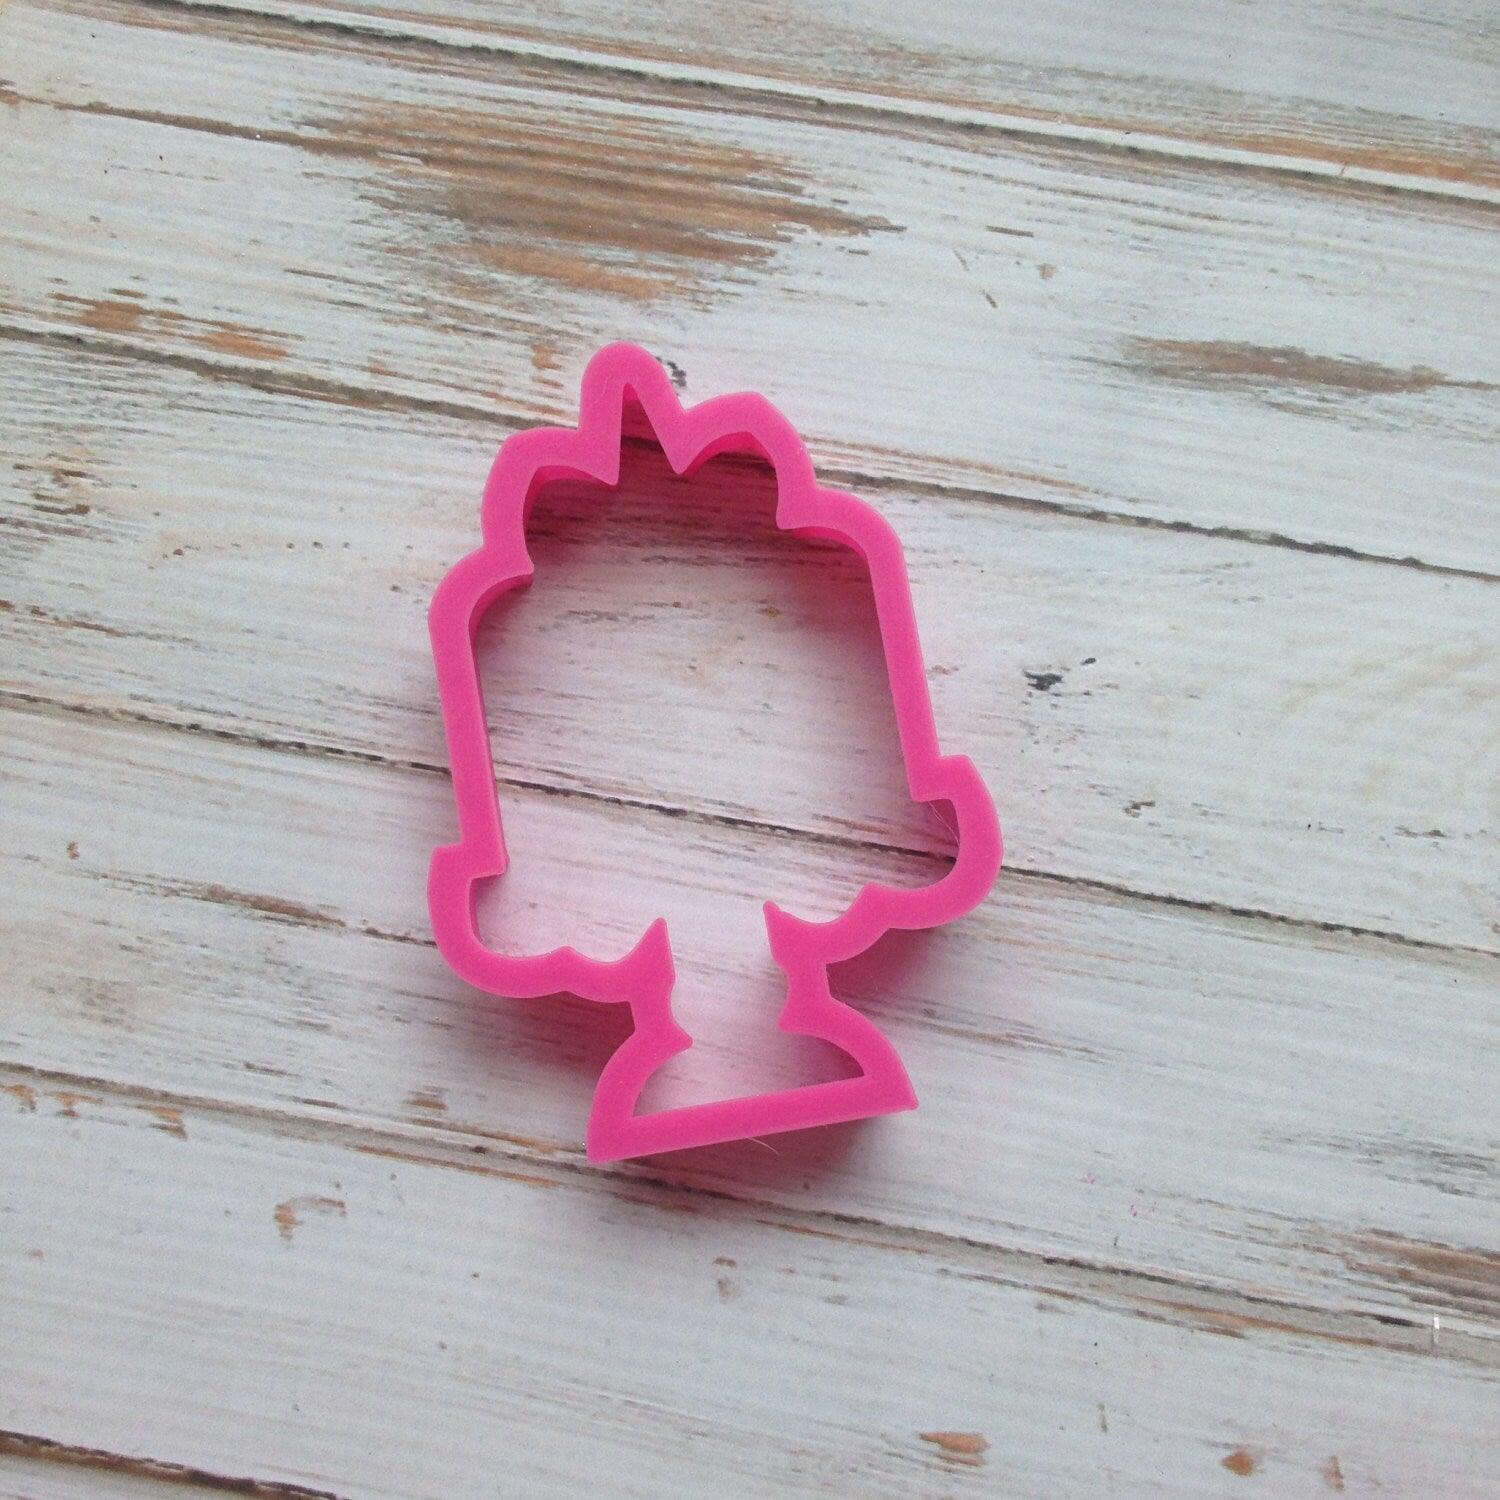 Unicorn Cake Stand Cookie Cutter - Sweetleigh 